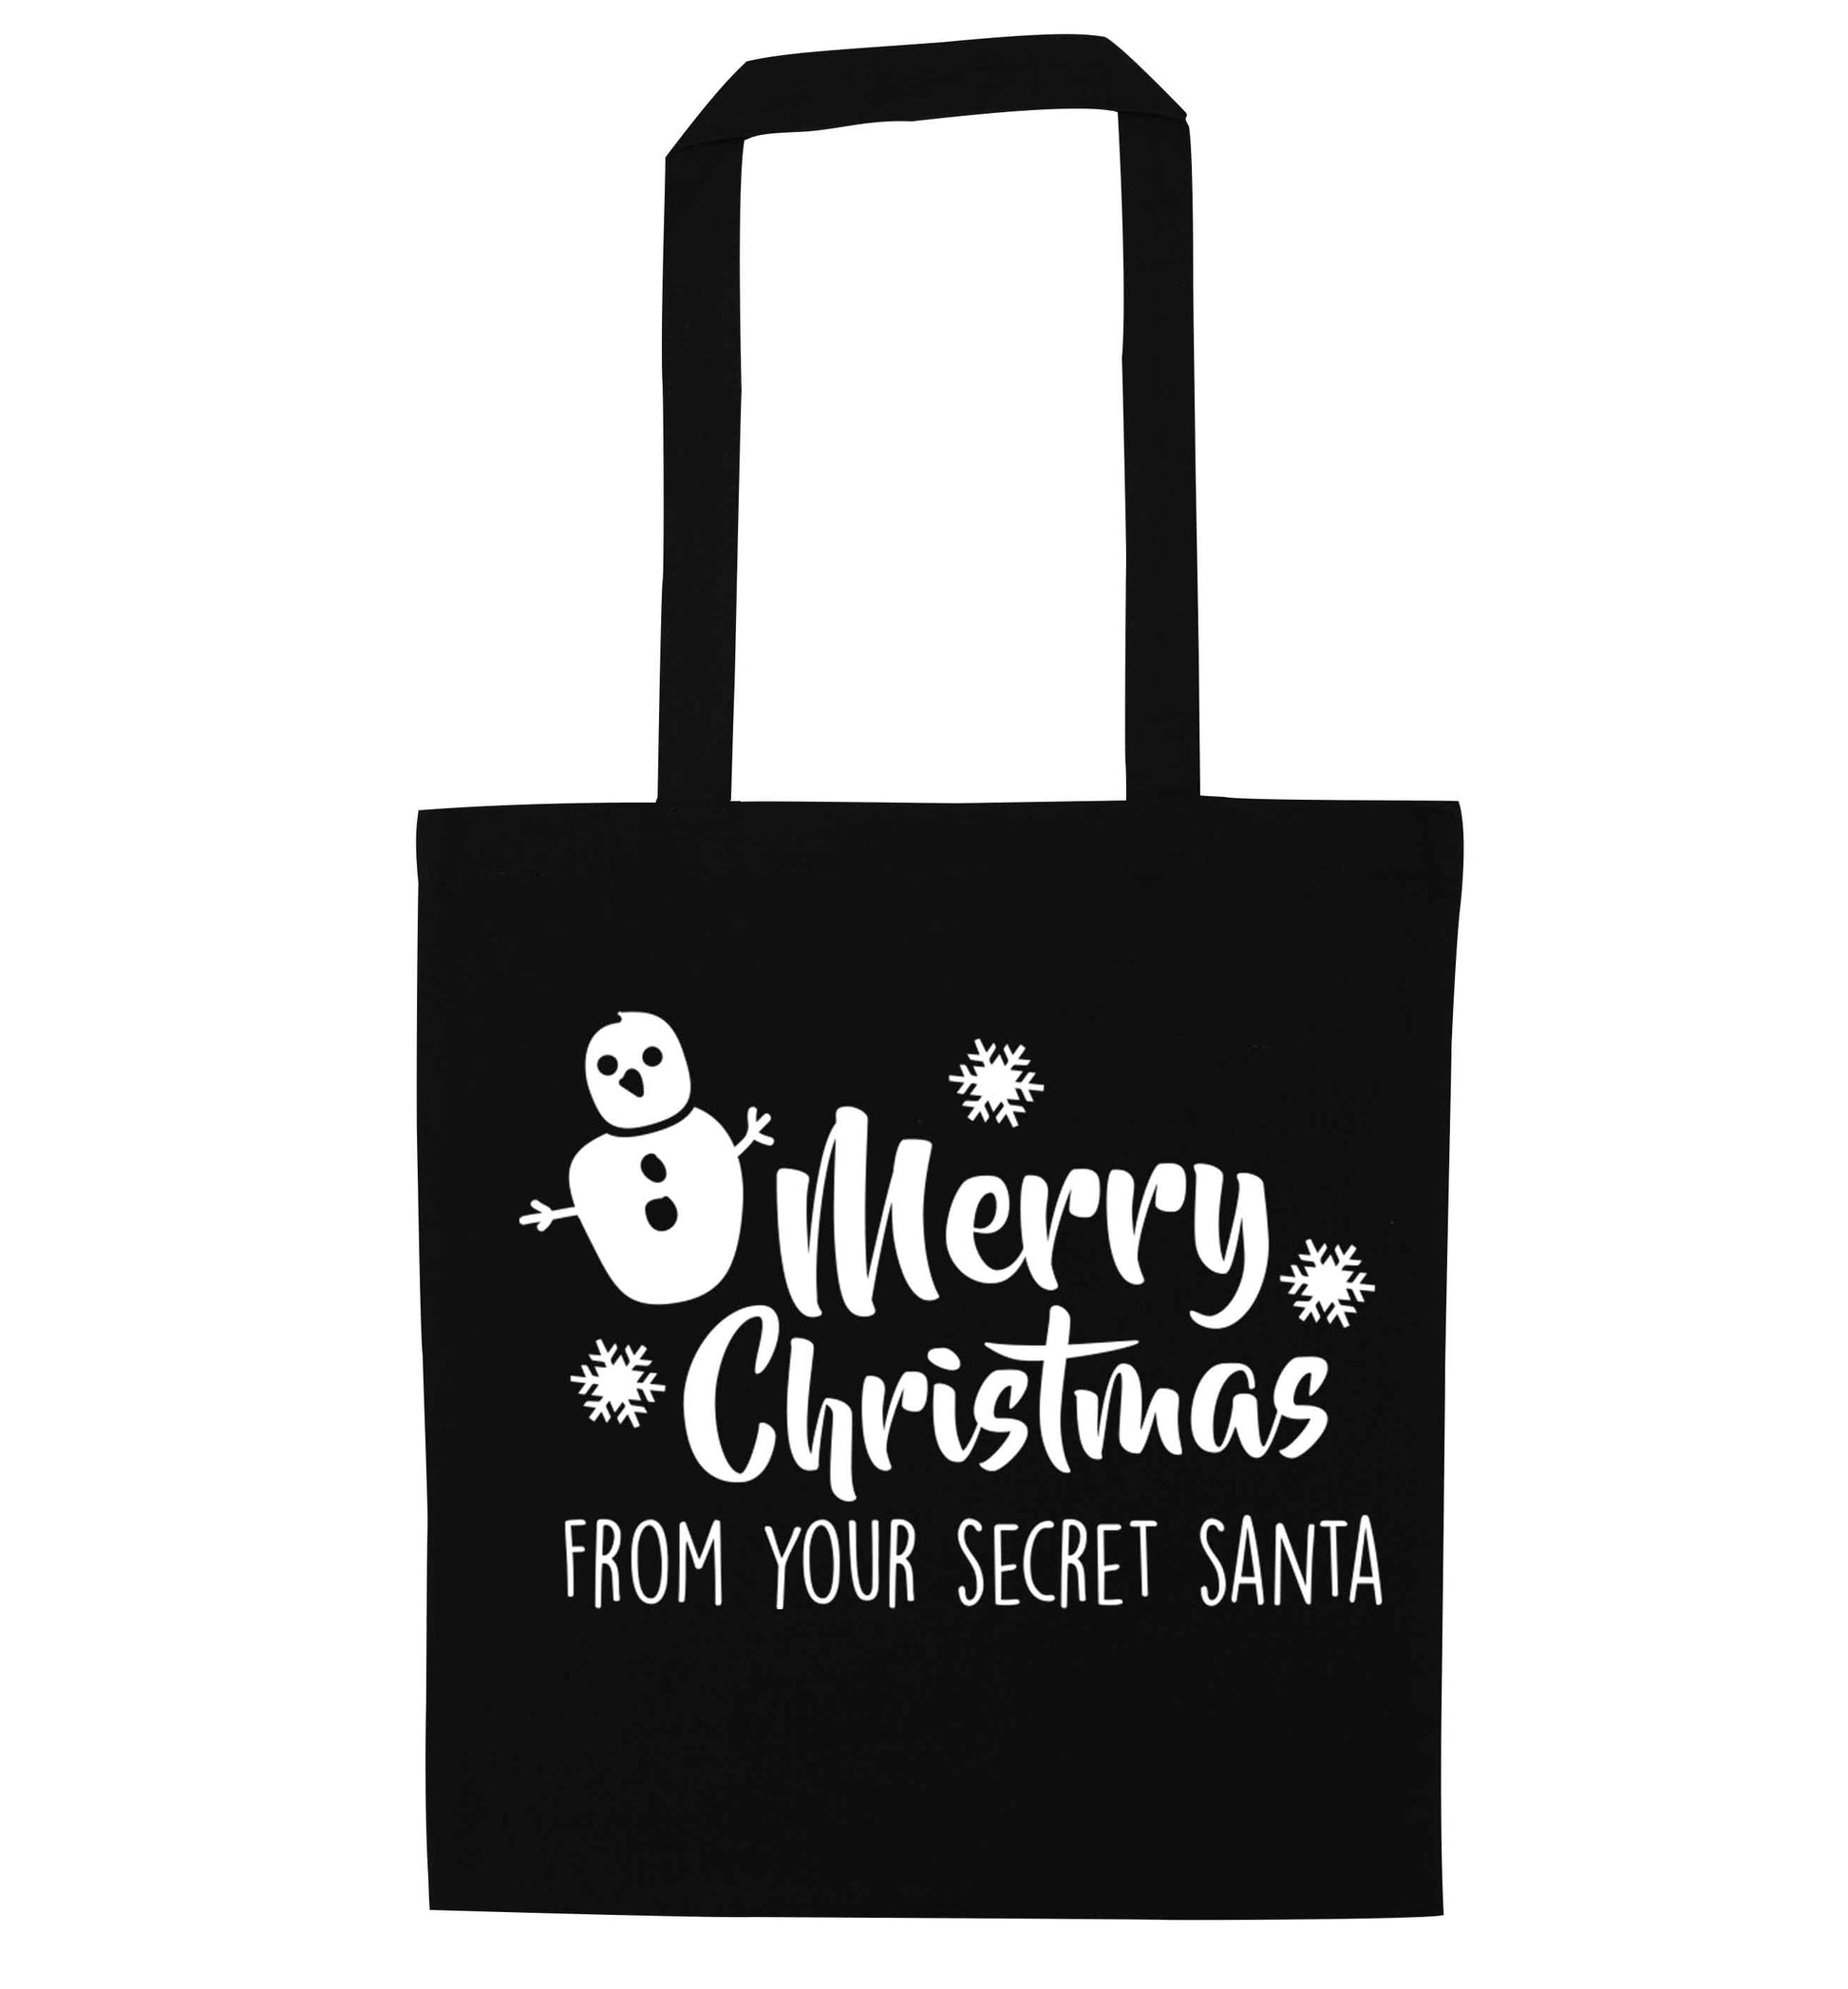 Merry Christmas from your secret Santa black tote bag